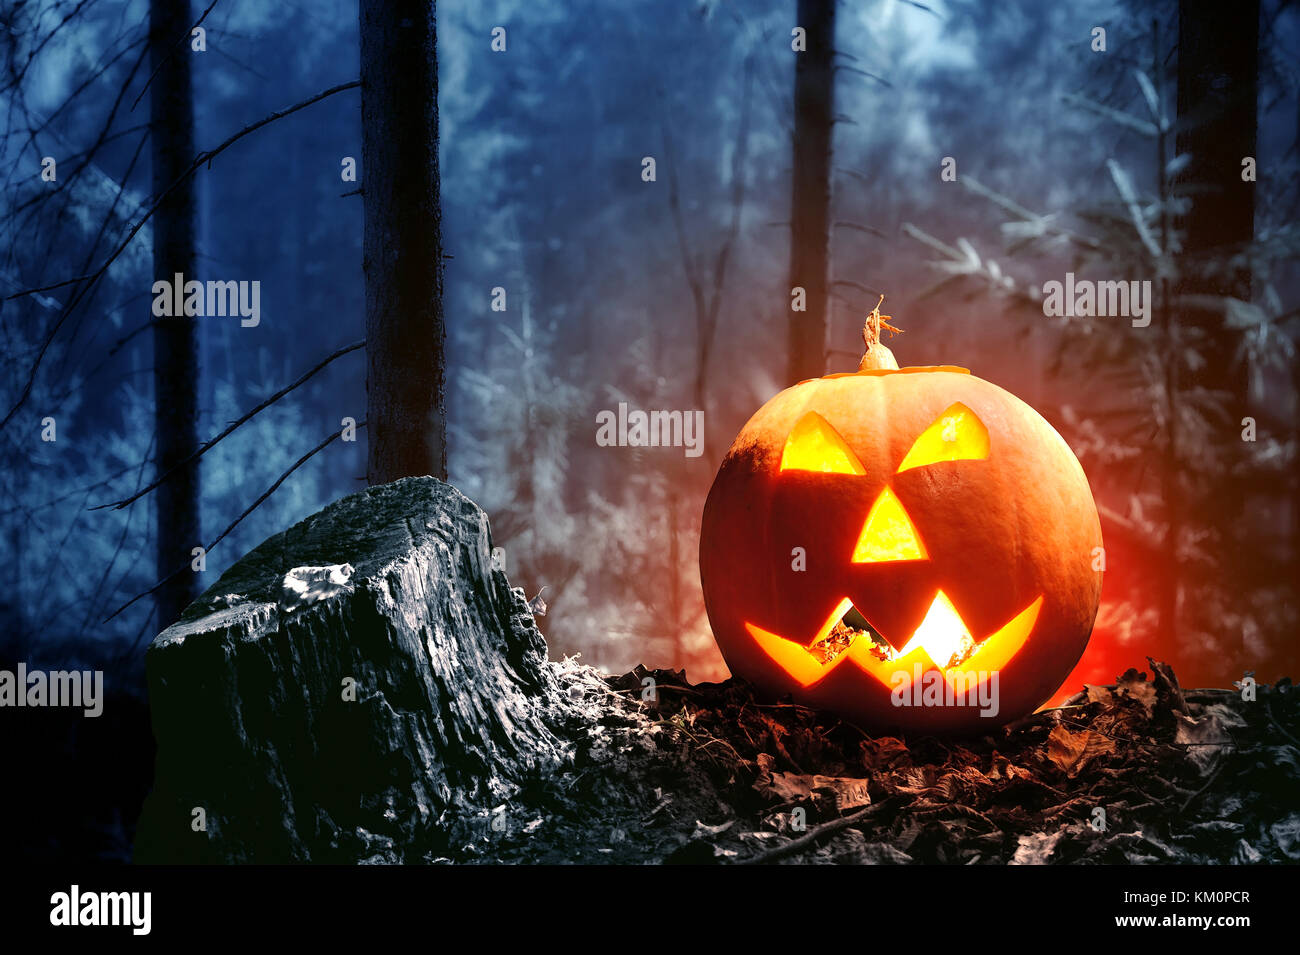 Halloween pumpkin with candle in dark forest Stock Photo